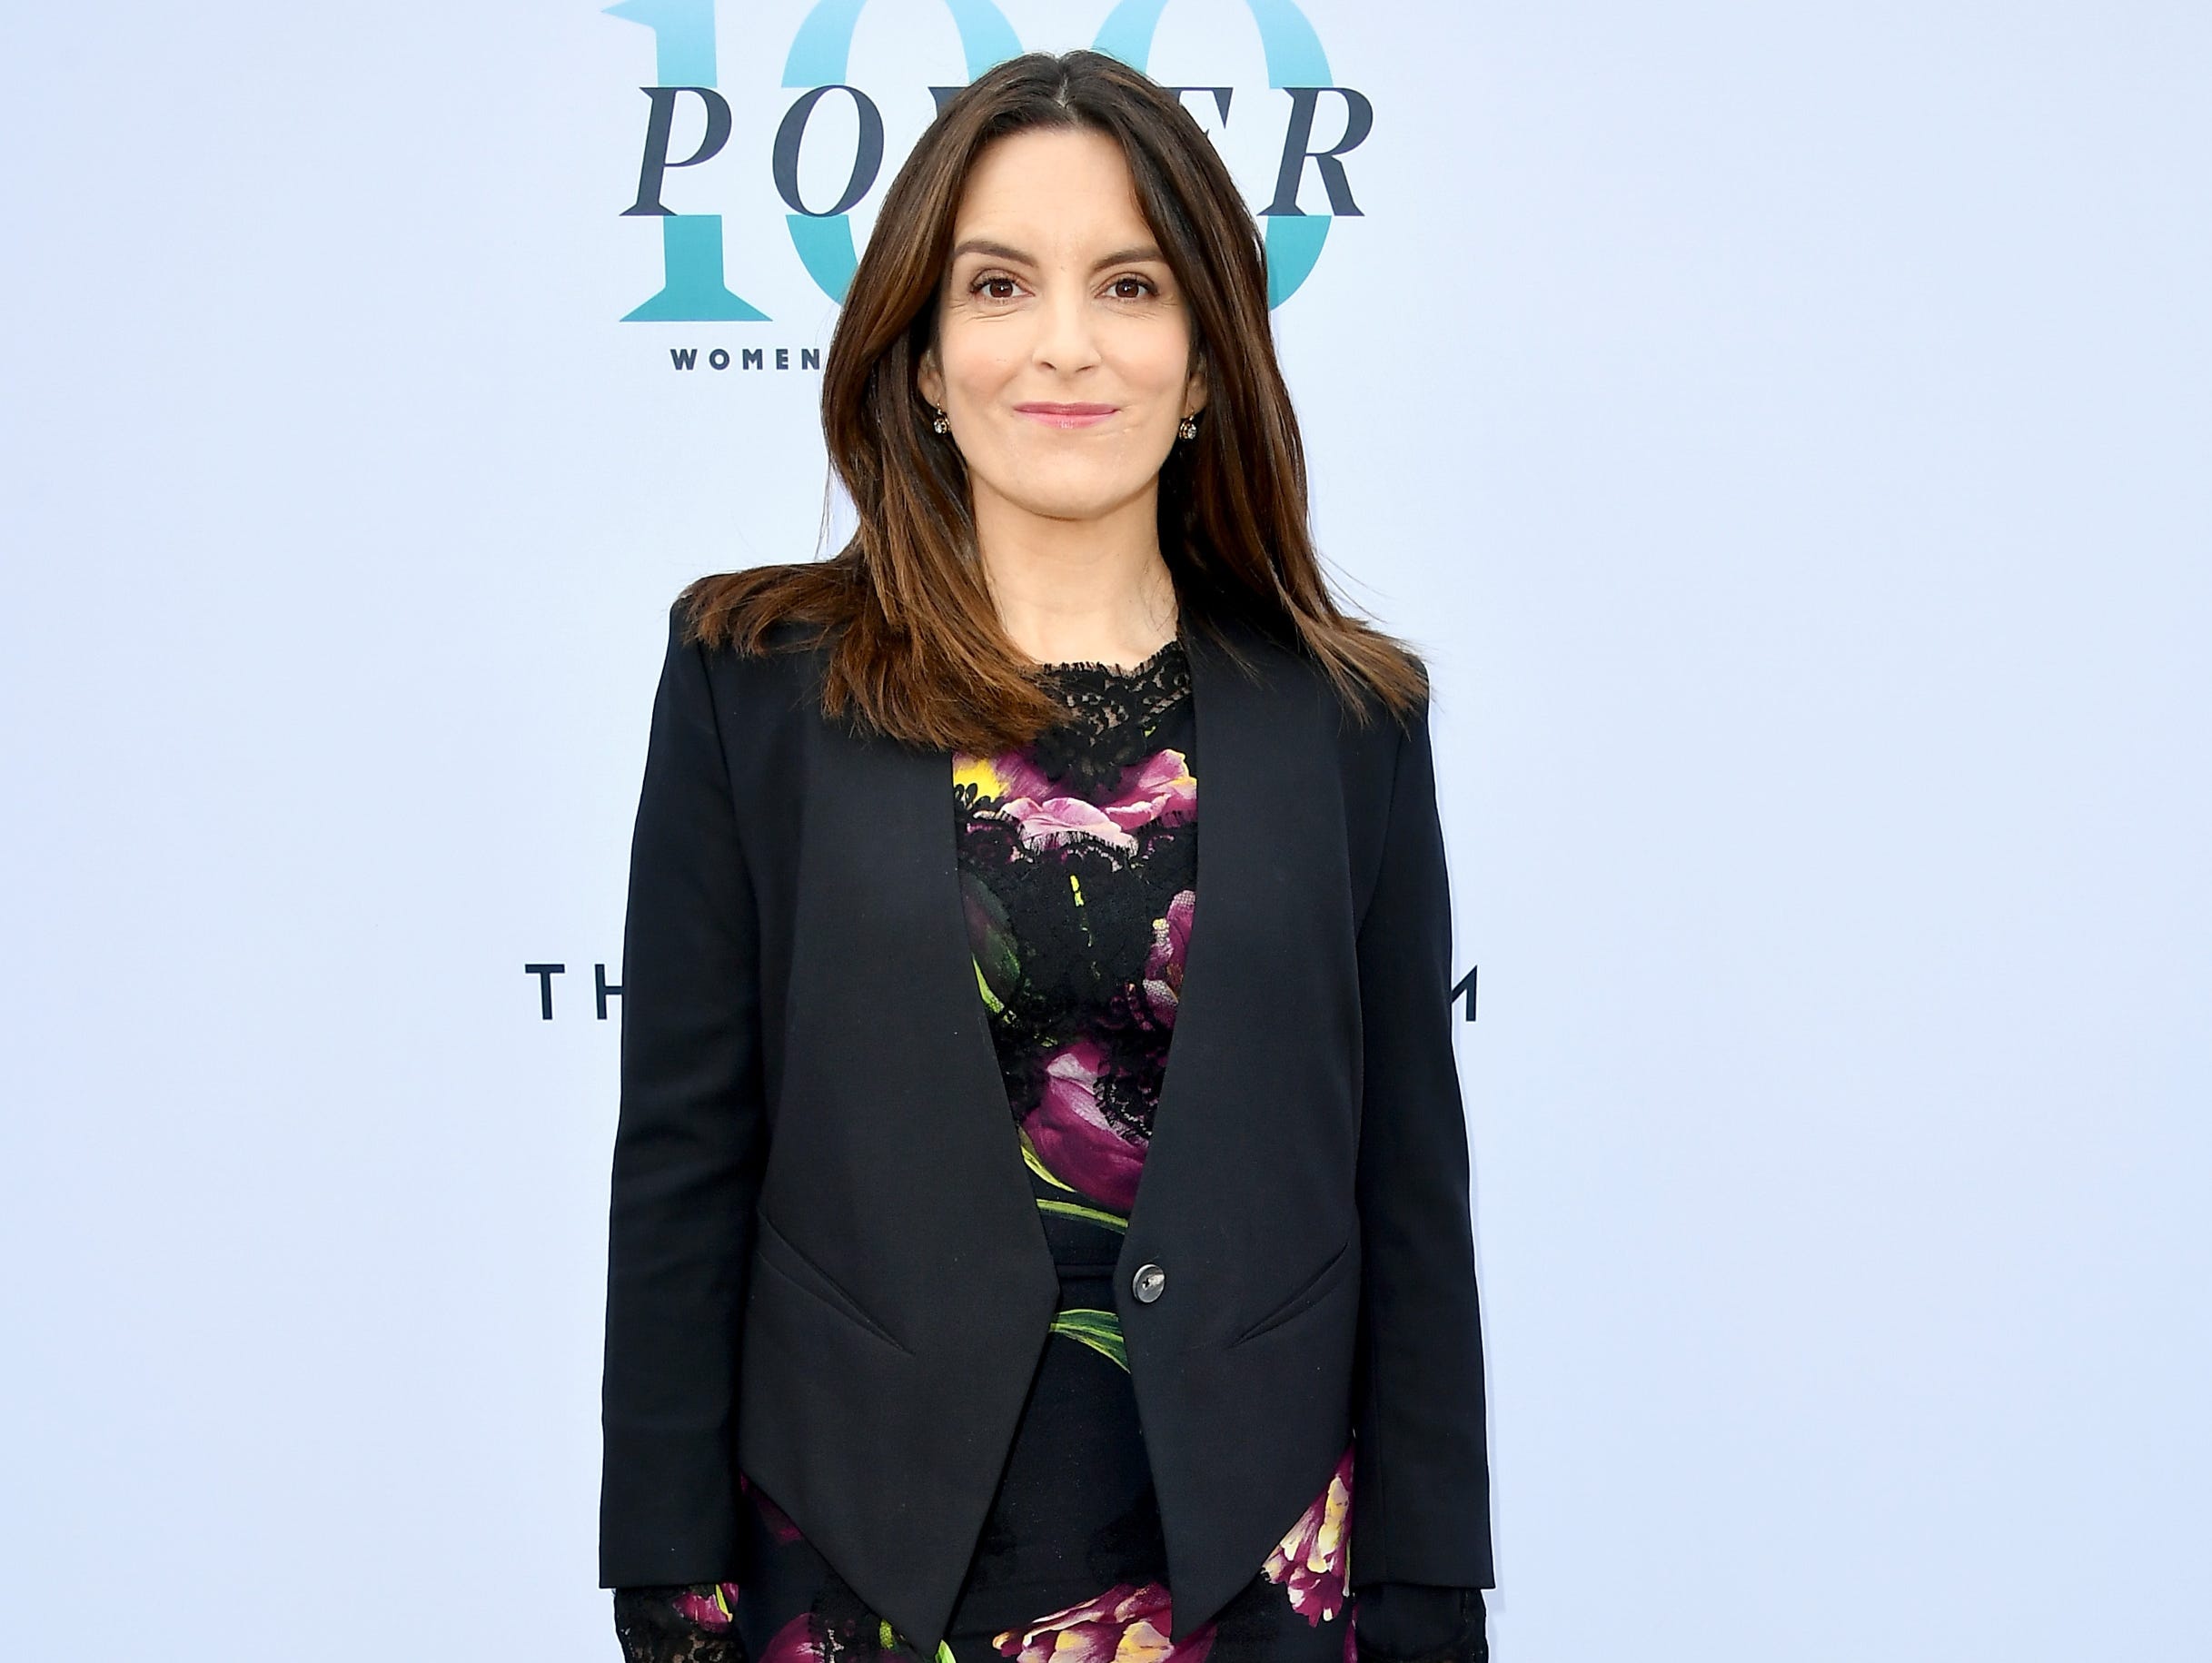 HOLLYWOOD, CA - DECEMBER 07:  Actress Tina Fey attends The Hollywood Reporter's 25th Annual Women in Entertainment Breakfast at Milk Studios on December 7, 2016 in Hollywood, California.  (Photo by Steve Granitz/WireImage) ORG XMIT: 684063919 ORIG FI